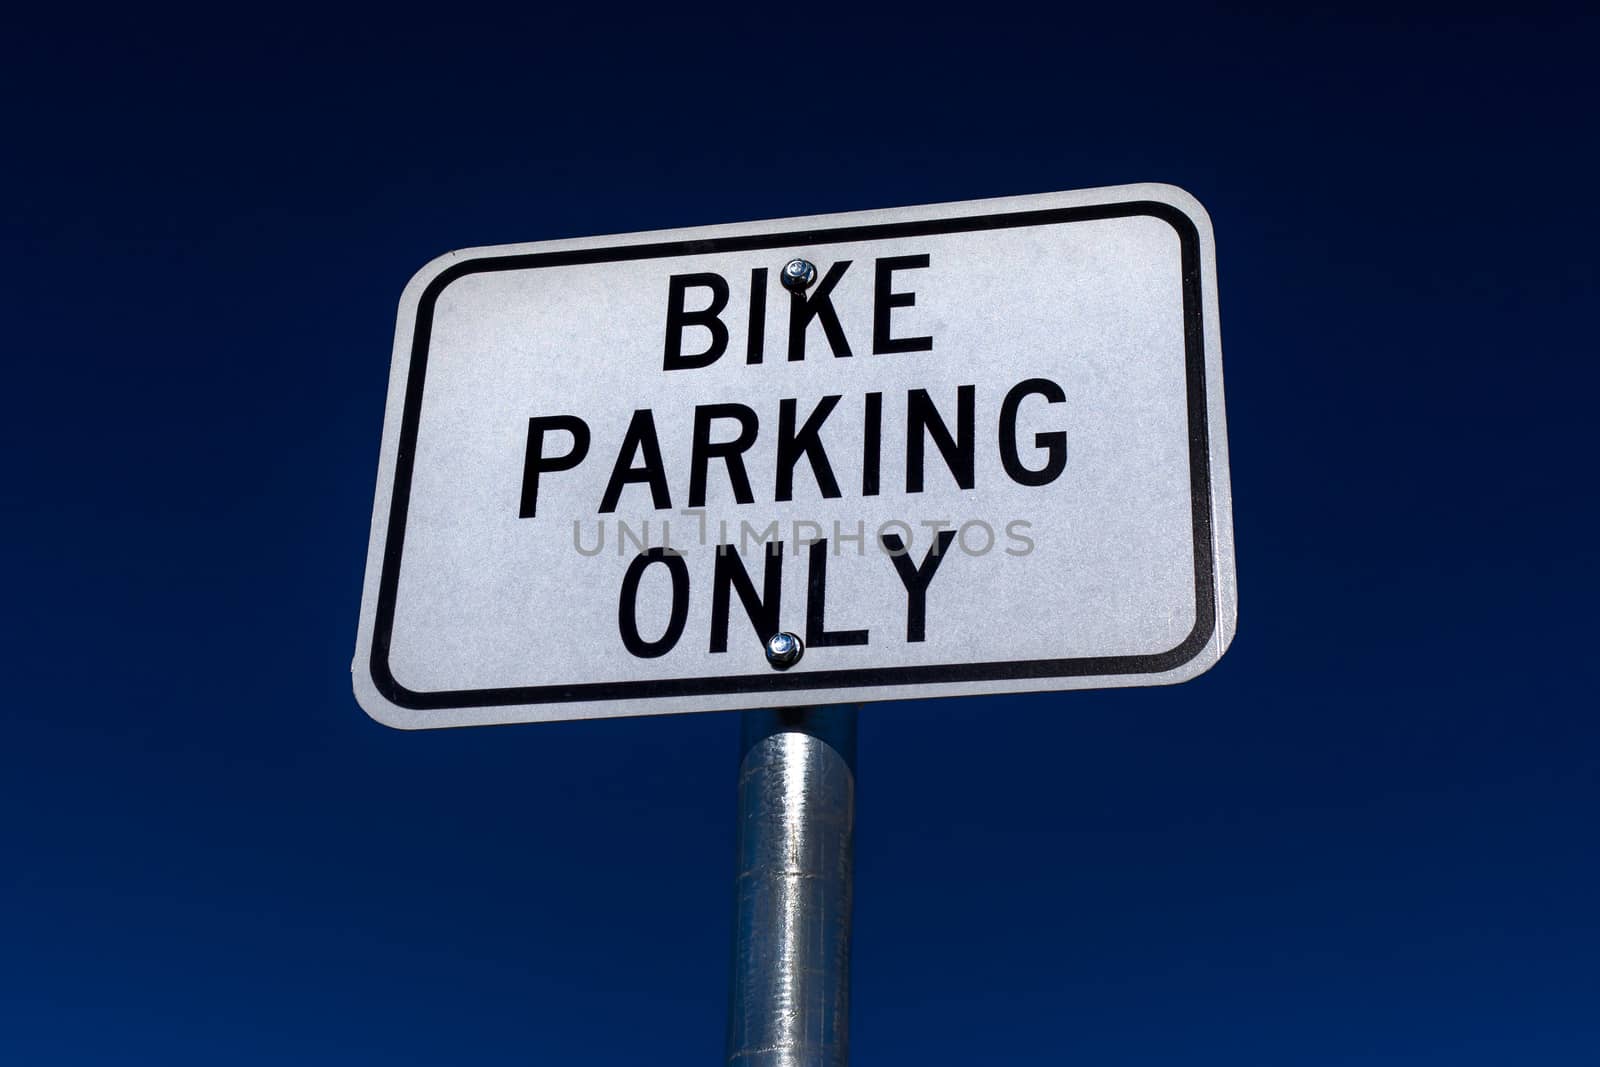 Bicycle parking only sign with black letters on white background and blue sky.